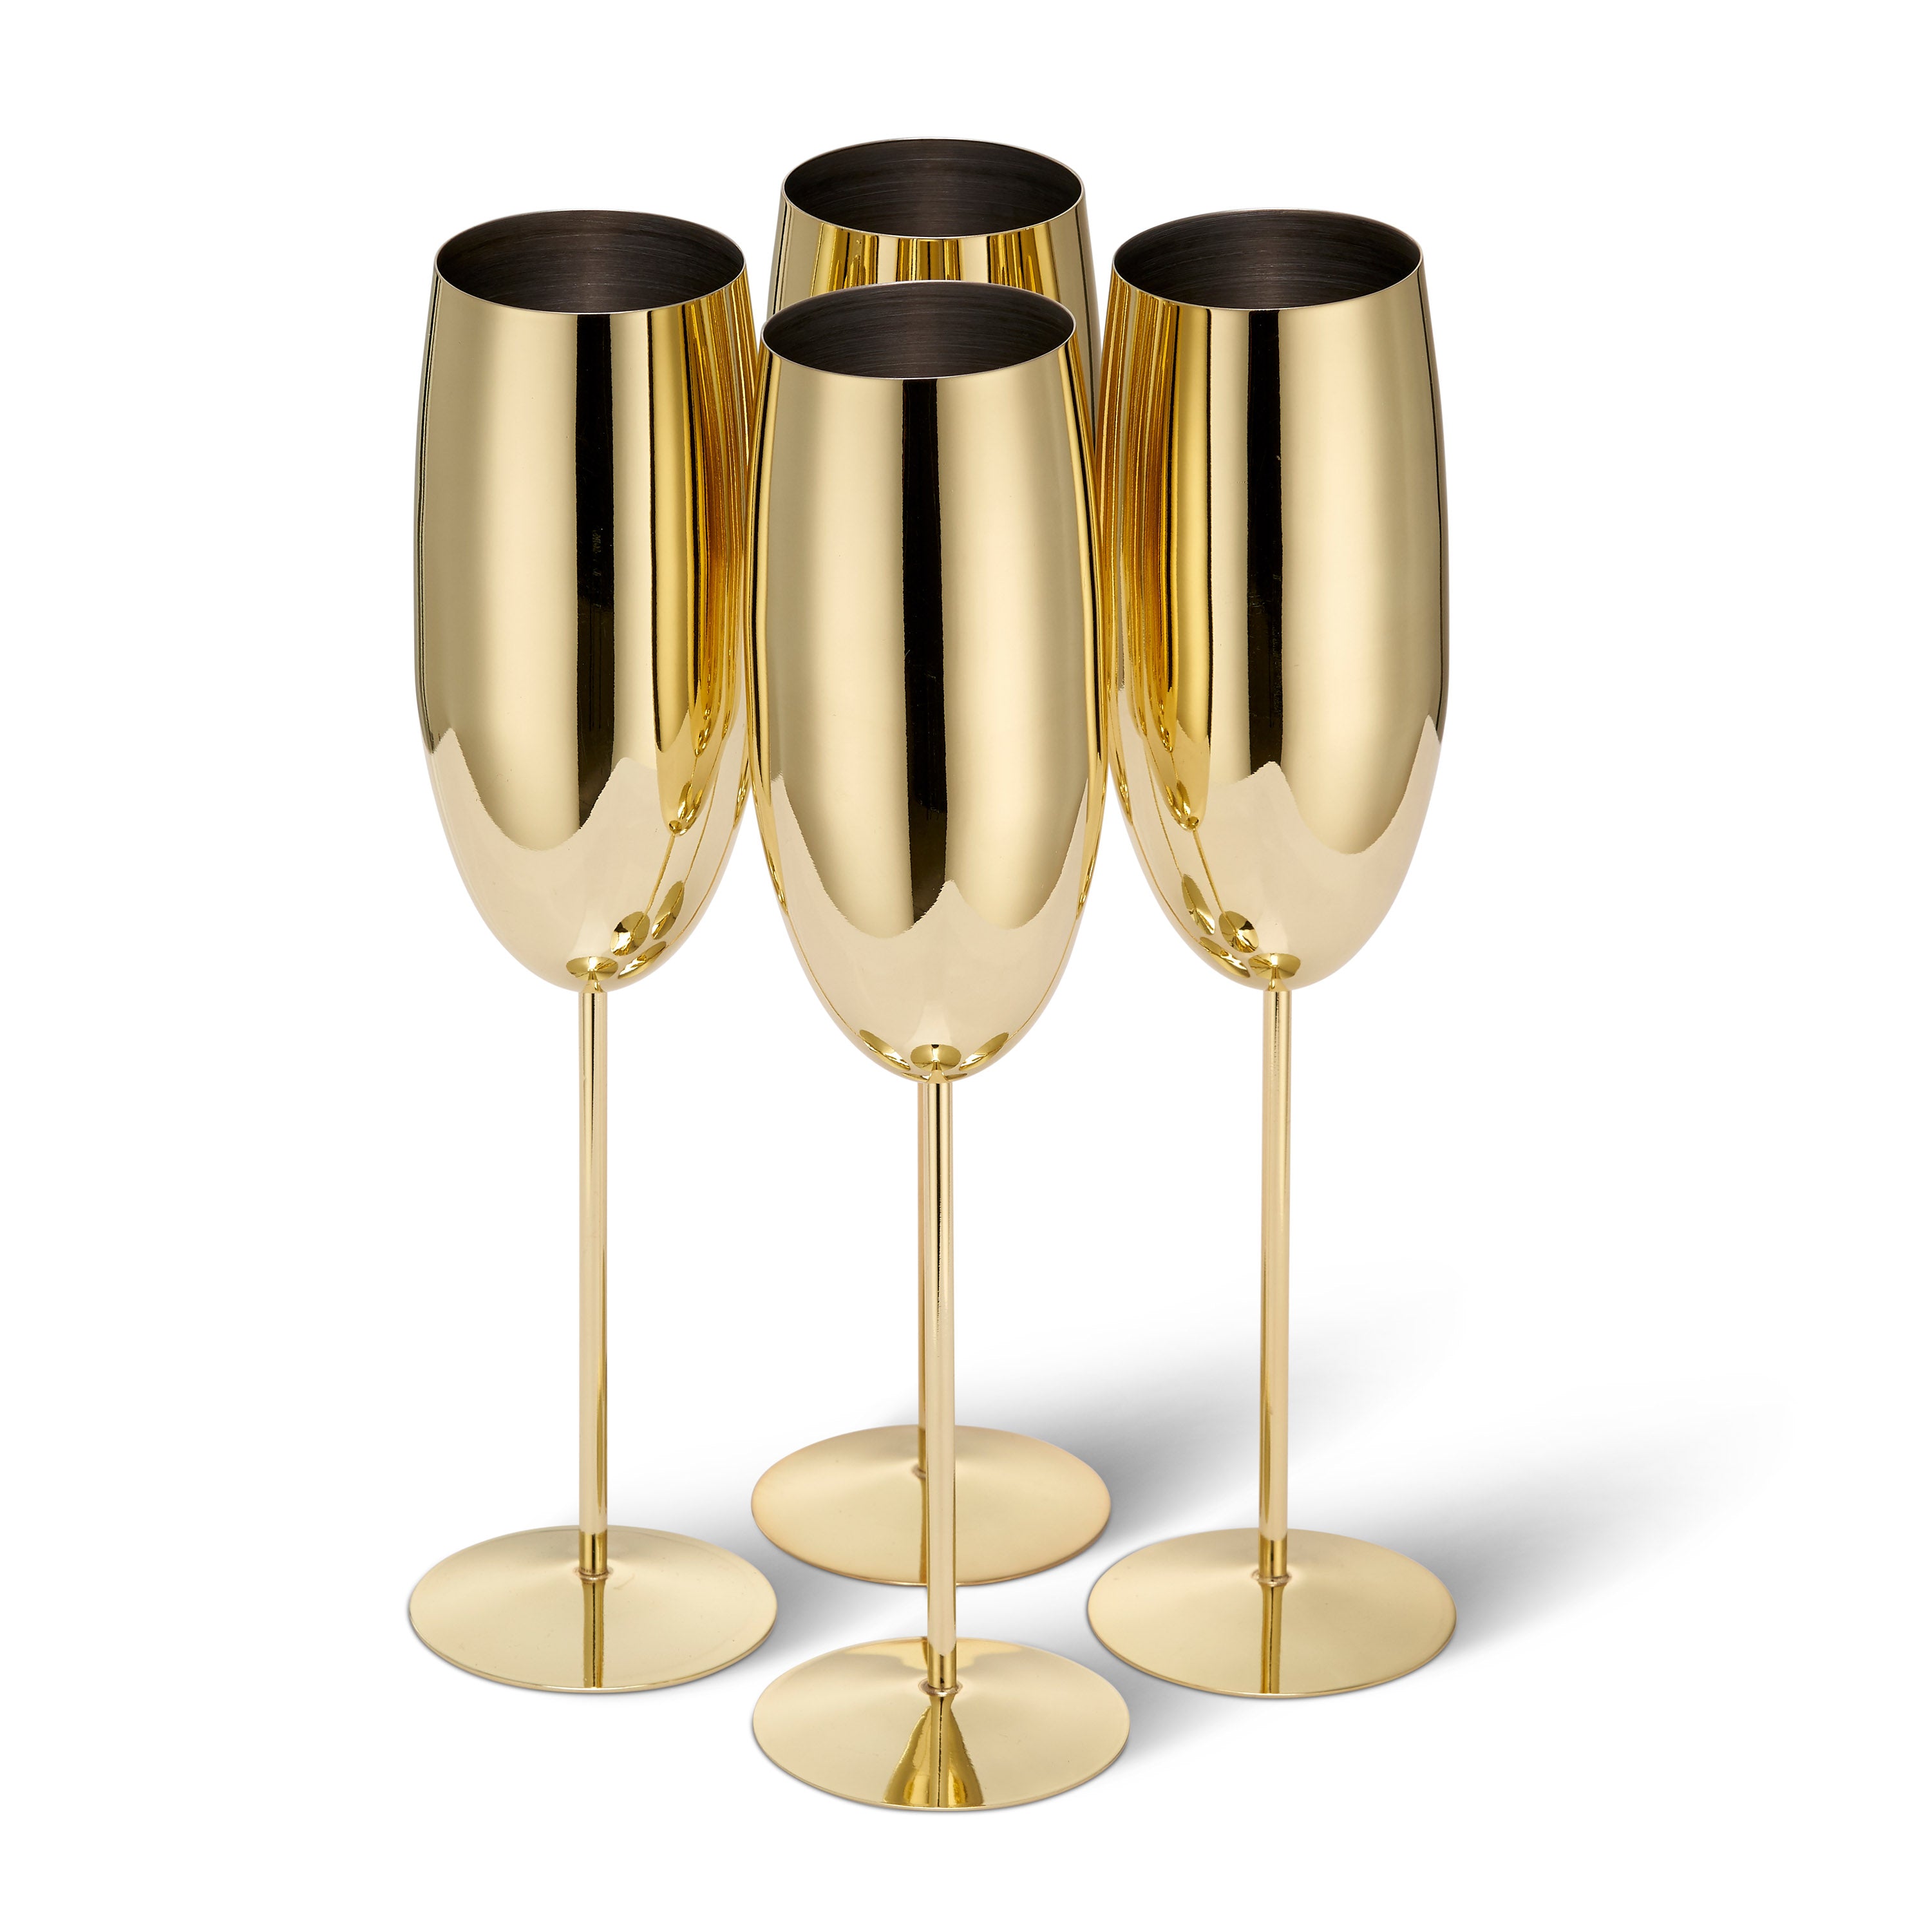 8-Ounce Metallic Gold Tone Martini Glasses, Golden Drinking Glass for a  Cocktail Party, Wedding, or Dinner, Set of 4